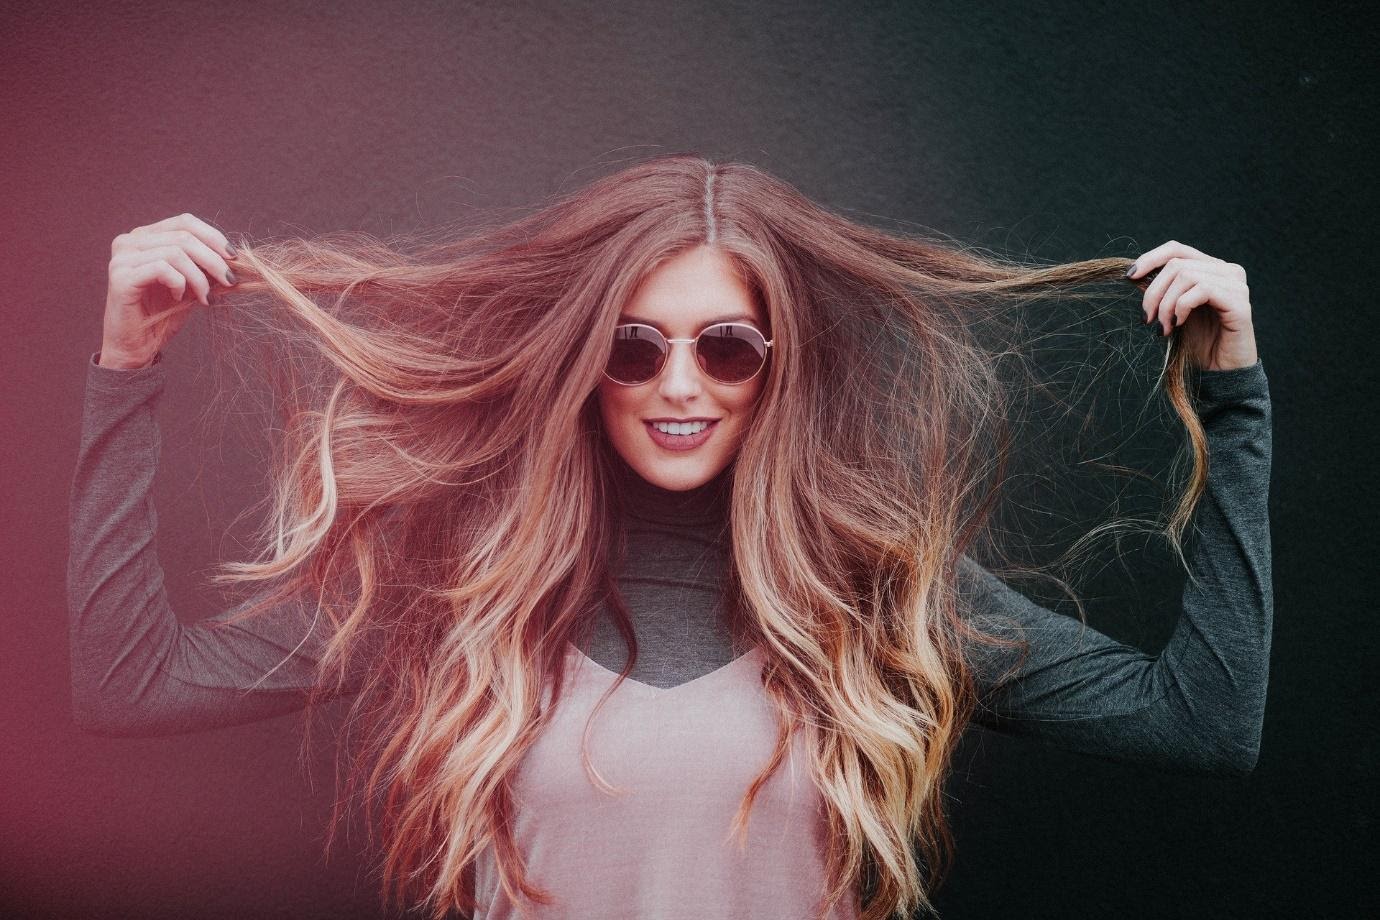 HOW TO PREP YOUR HAIR BEFORE PROFESSIONAL STYLING